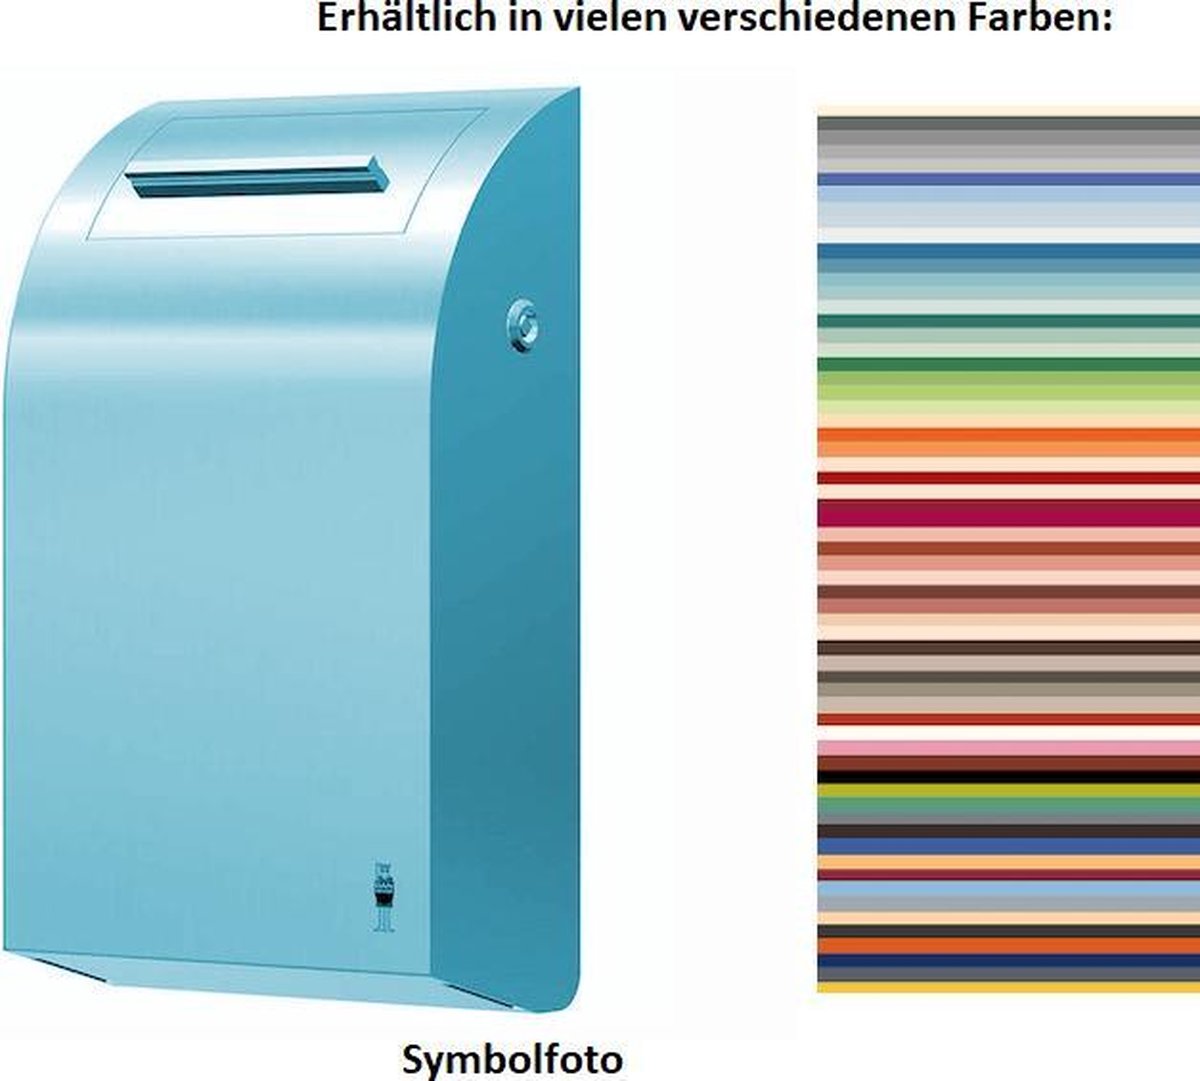 Dan Dryer Exclusive waste bin made with inner bucket in many different colors